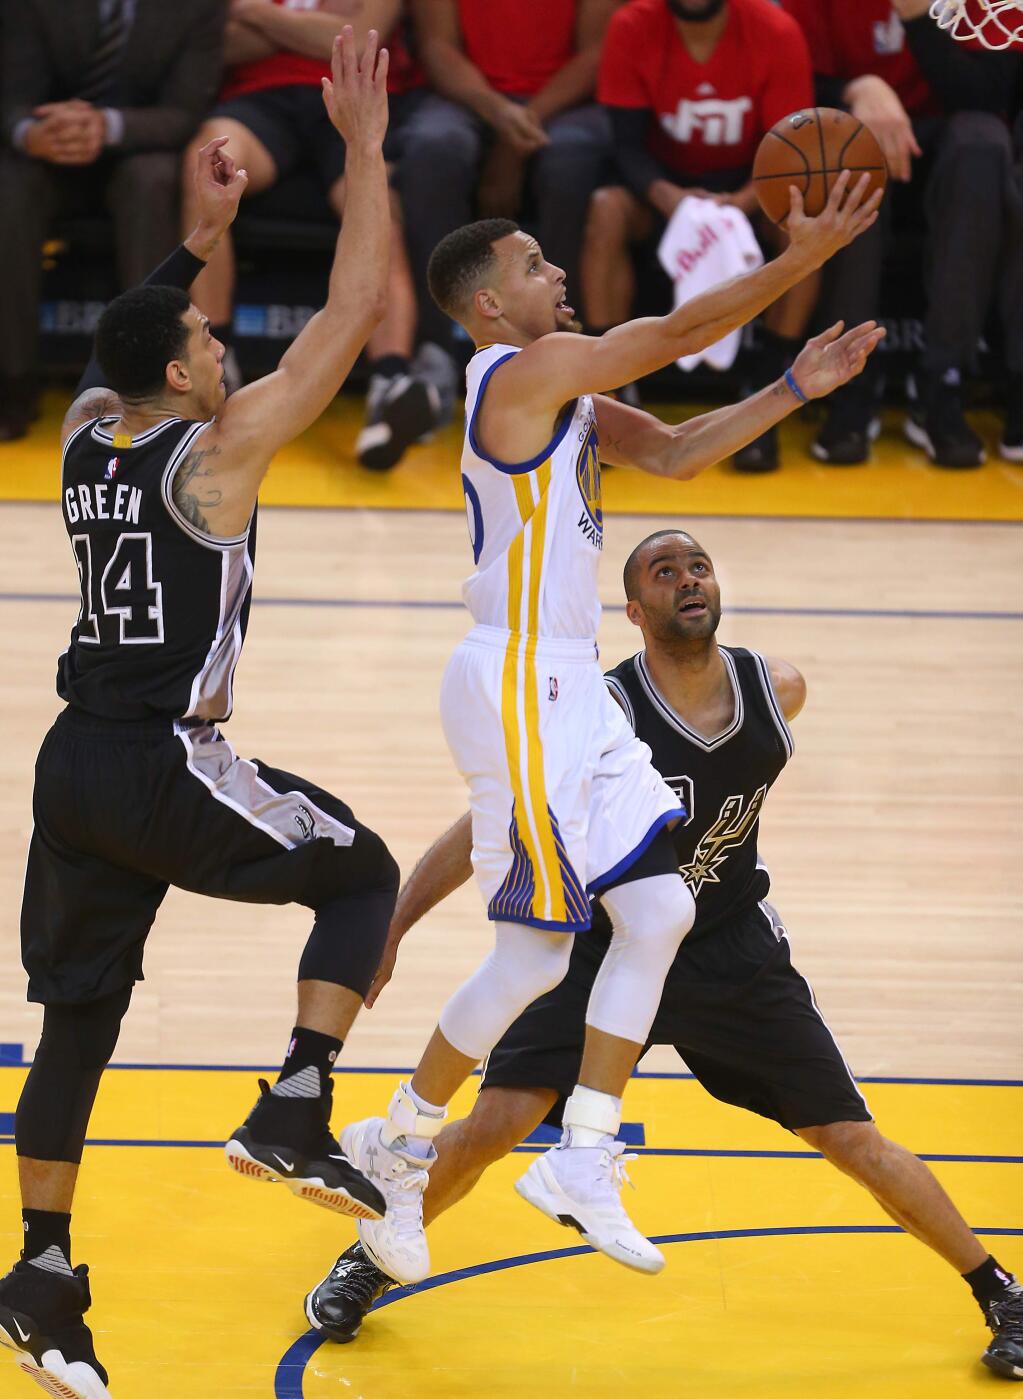 Golden State Warriors guard Stephen Curry goes to the basket between San Antonio Spurs defenders Danny Green and Tony Parker during their game in Oakland on Monday, Jan. 25, 2016. (Christopher Chung / The Press Democrat)